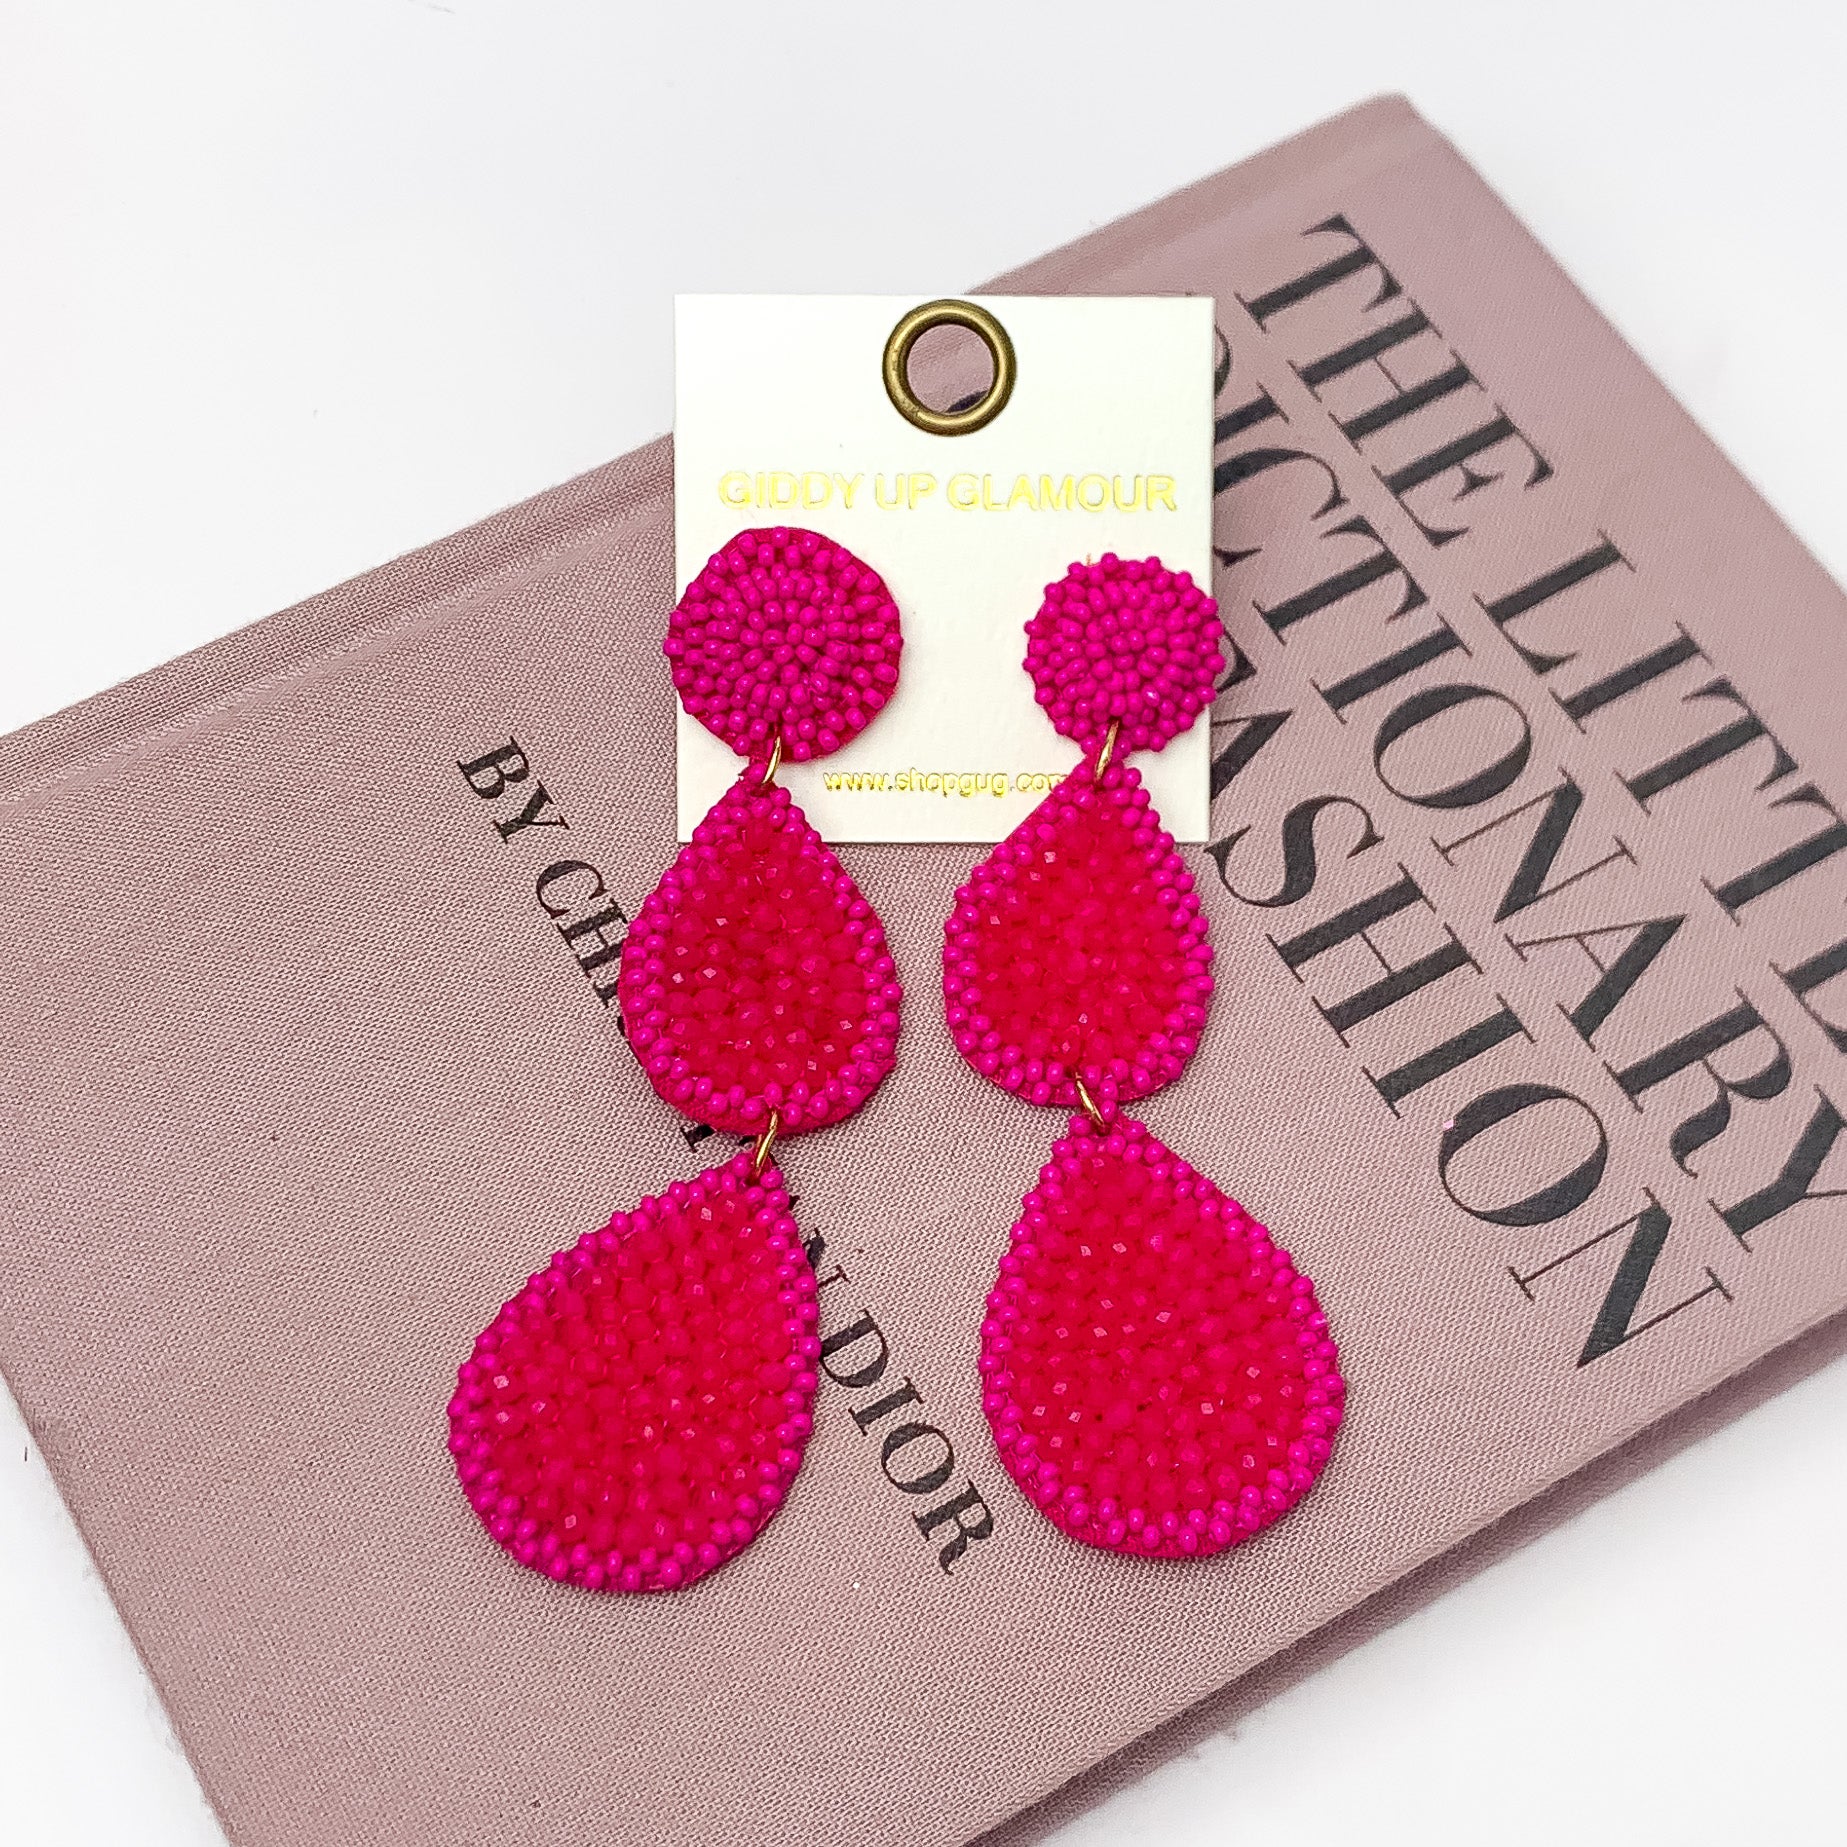 Glass Seed Beaded Drop Earrings in Fuchsia Pink | ONLY 1 LEFT! - Giddy Up Glamour Boutique